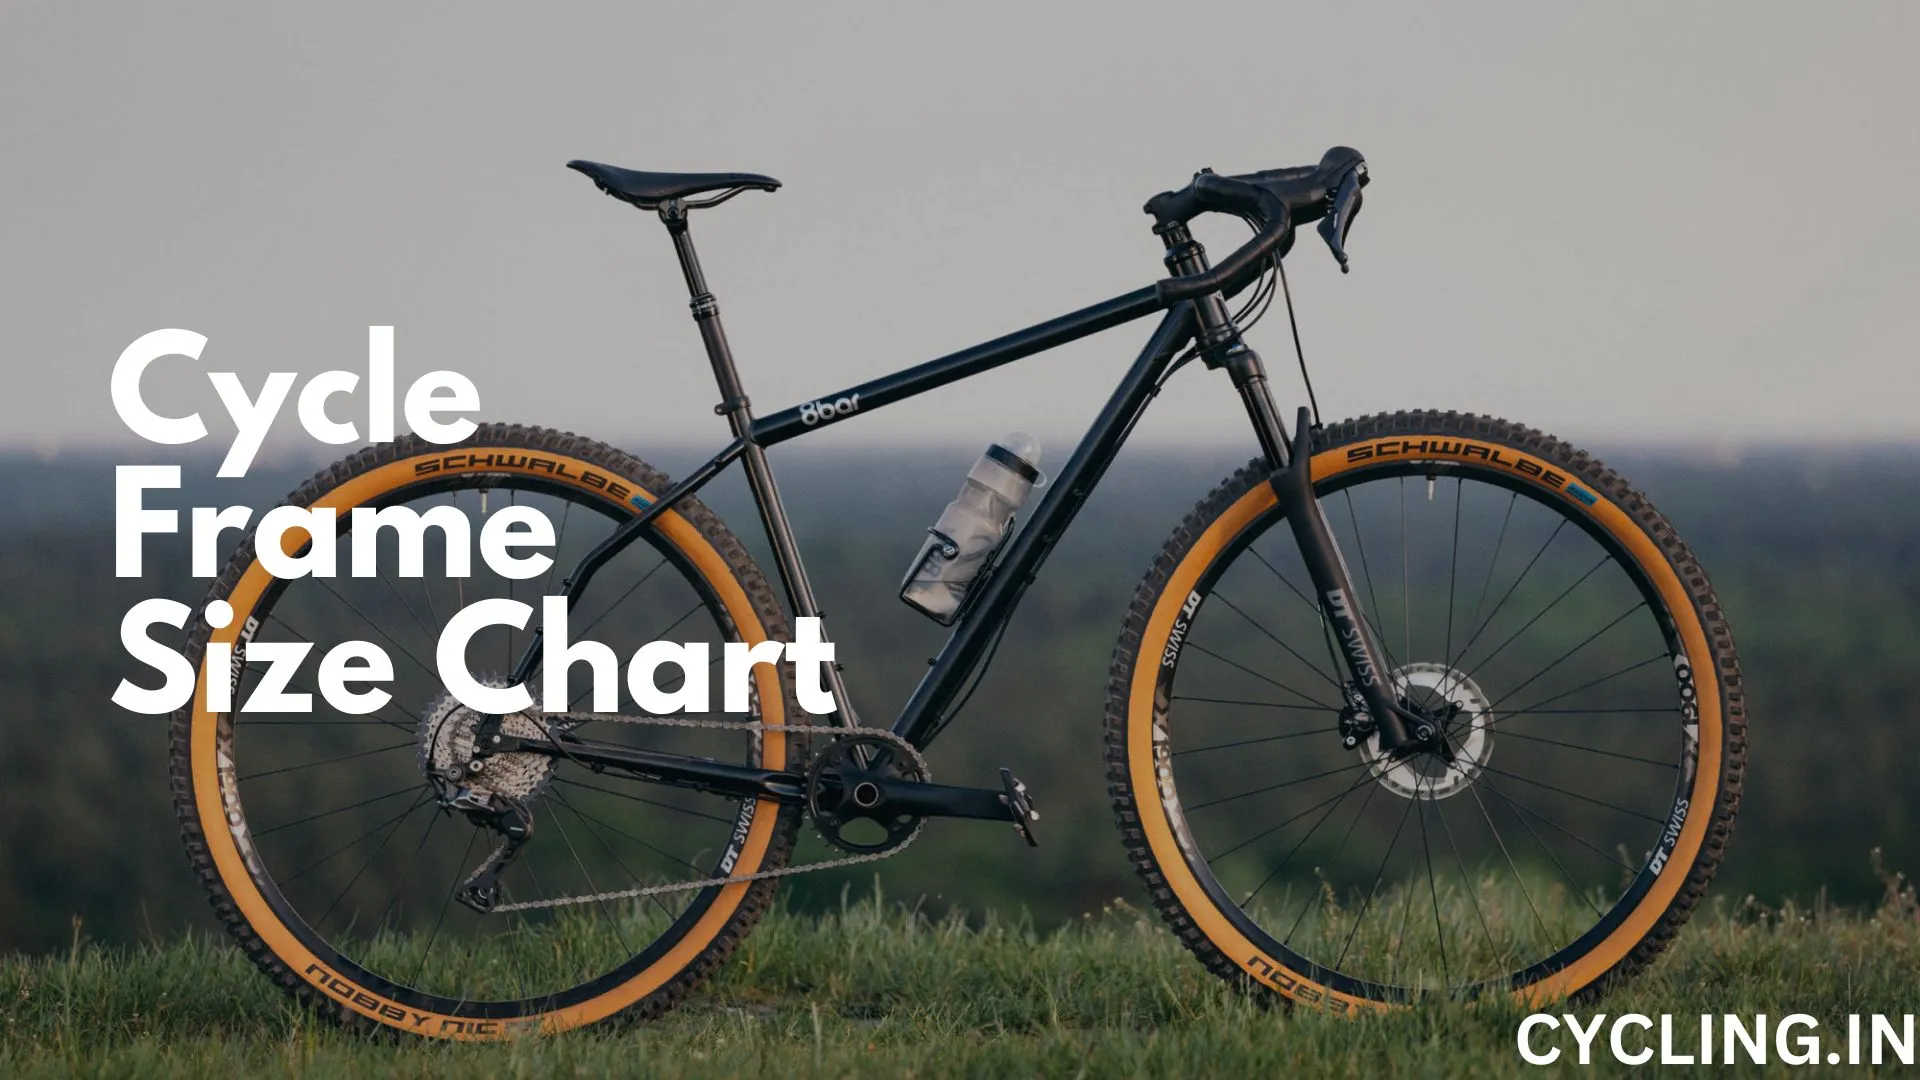 Cycle Frame Size Chart of India